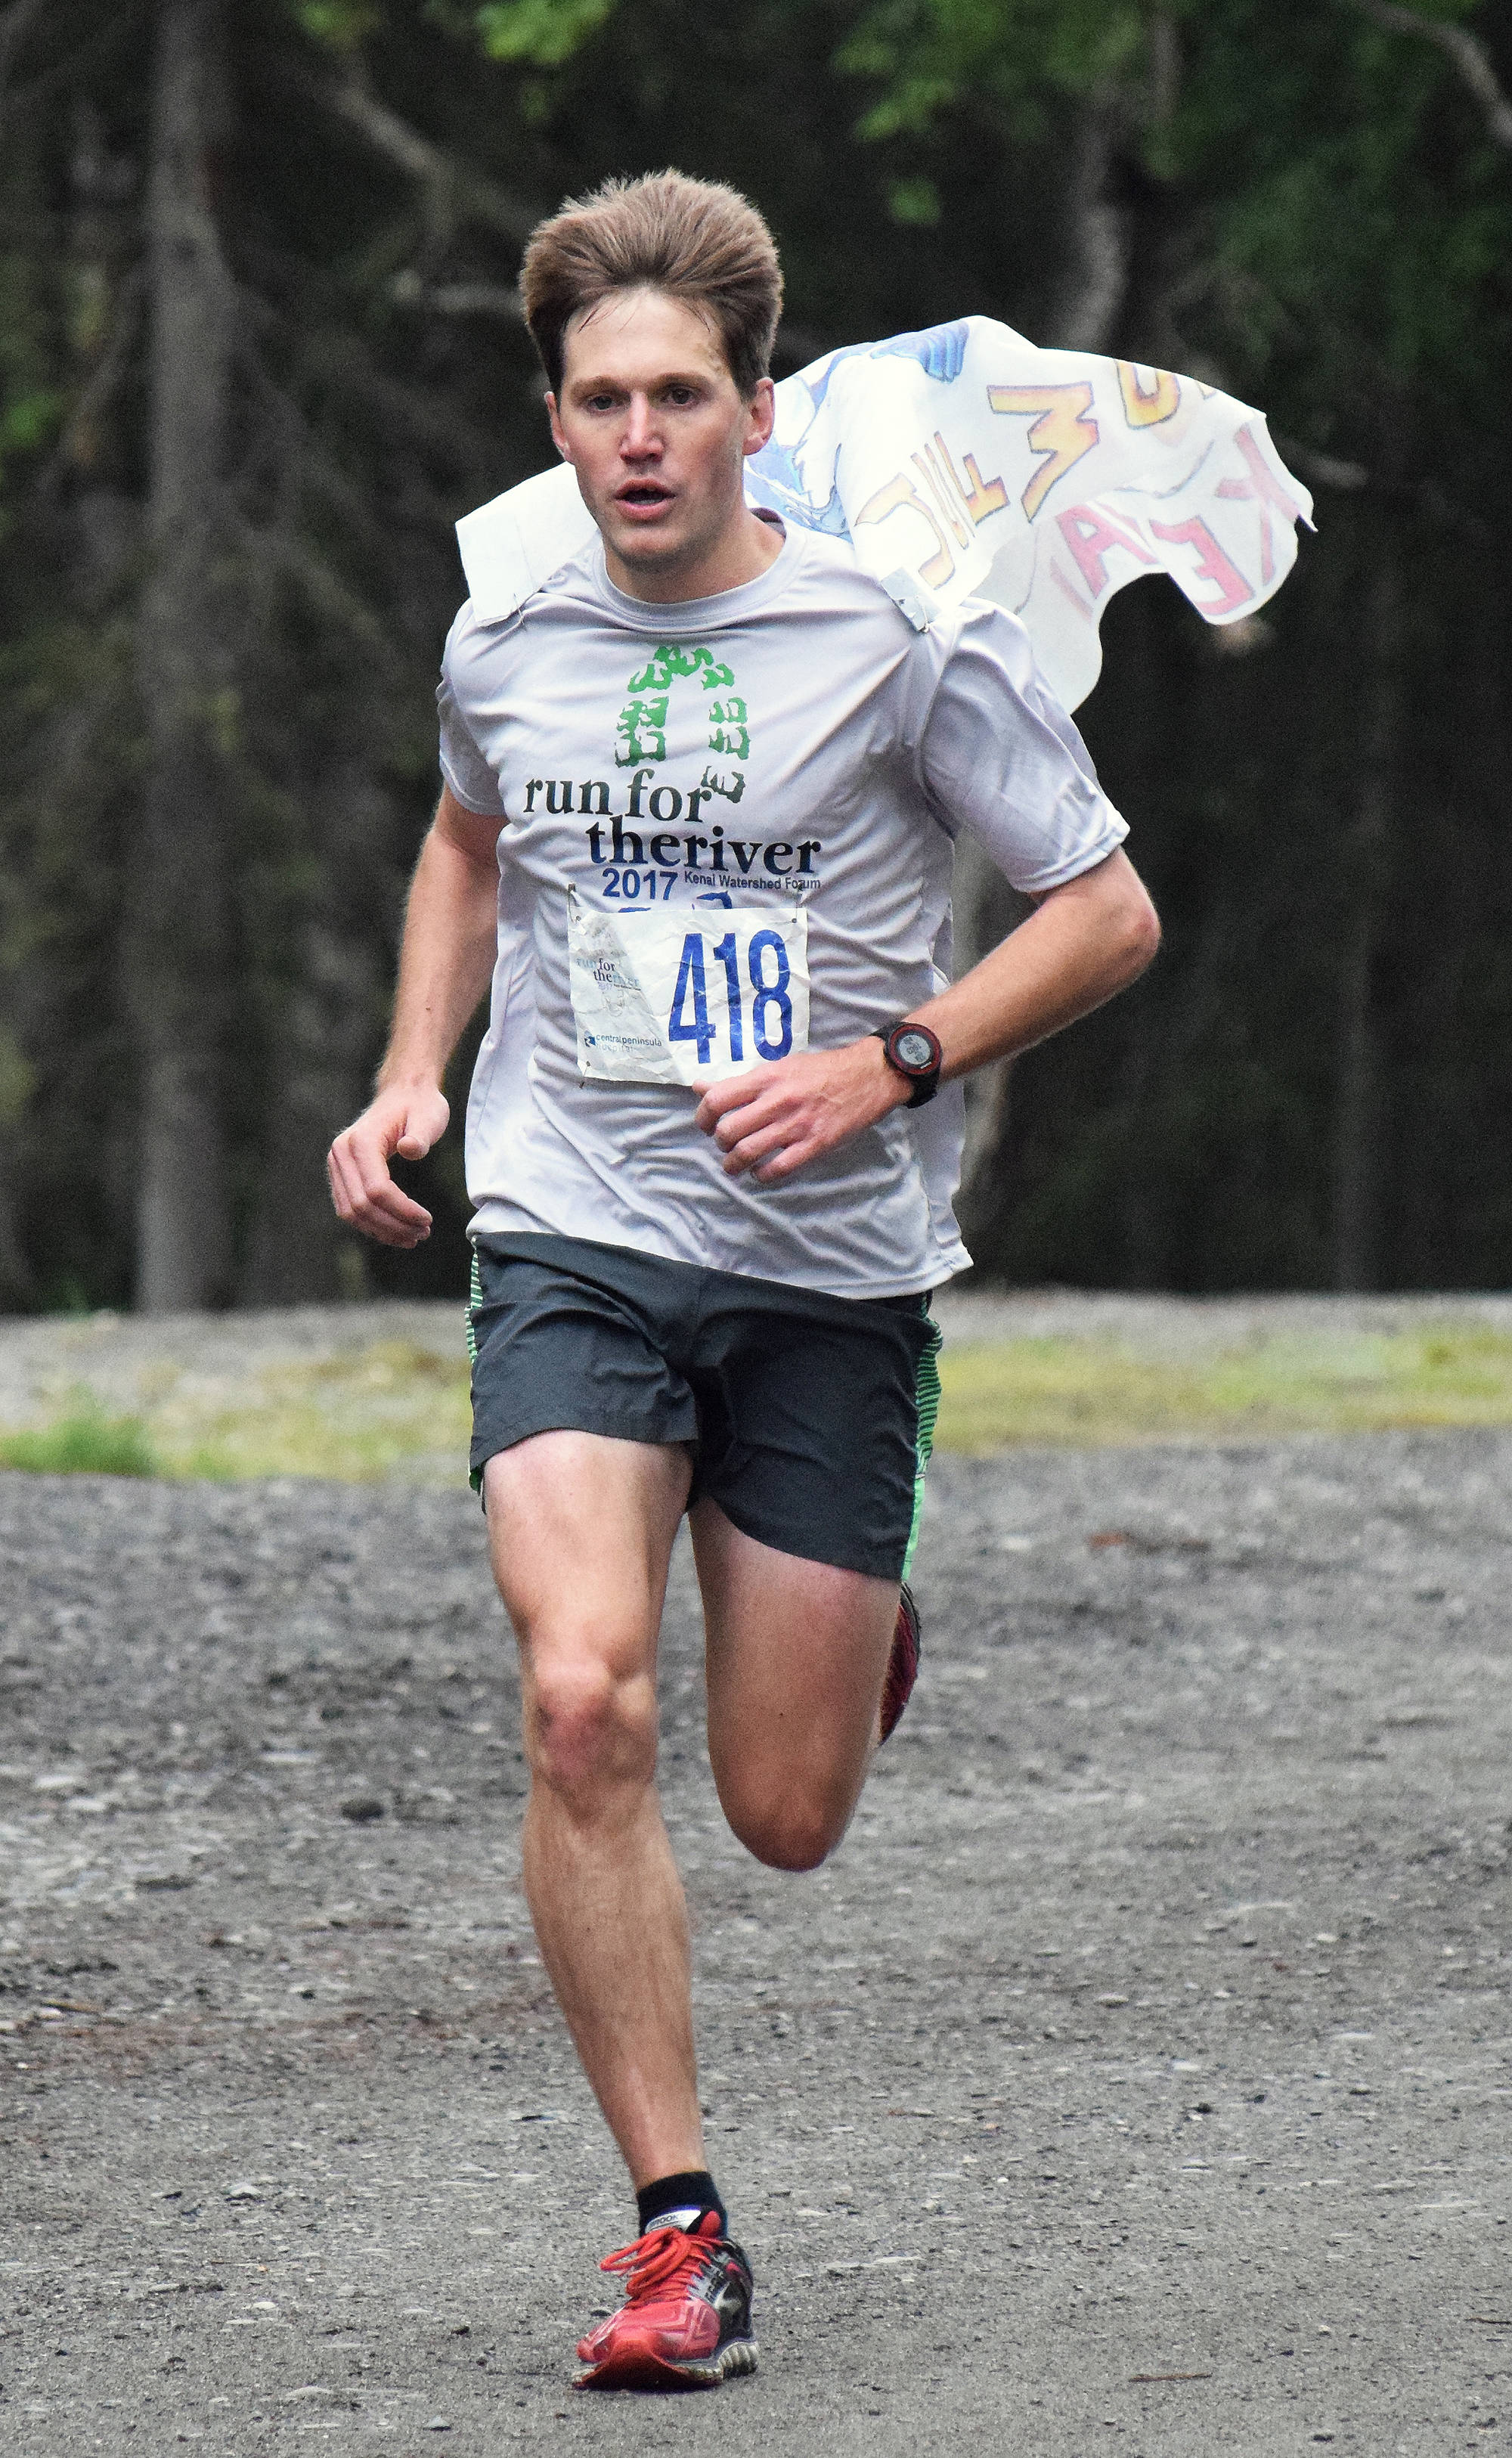 Men’s Run for the River 5-kilometer winner Travis Mabe races to the finish line Saturday morning in Soldotna. (Photo by Joey Klecka/Peninsula Clarion)